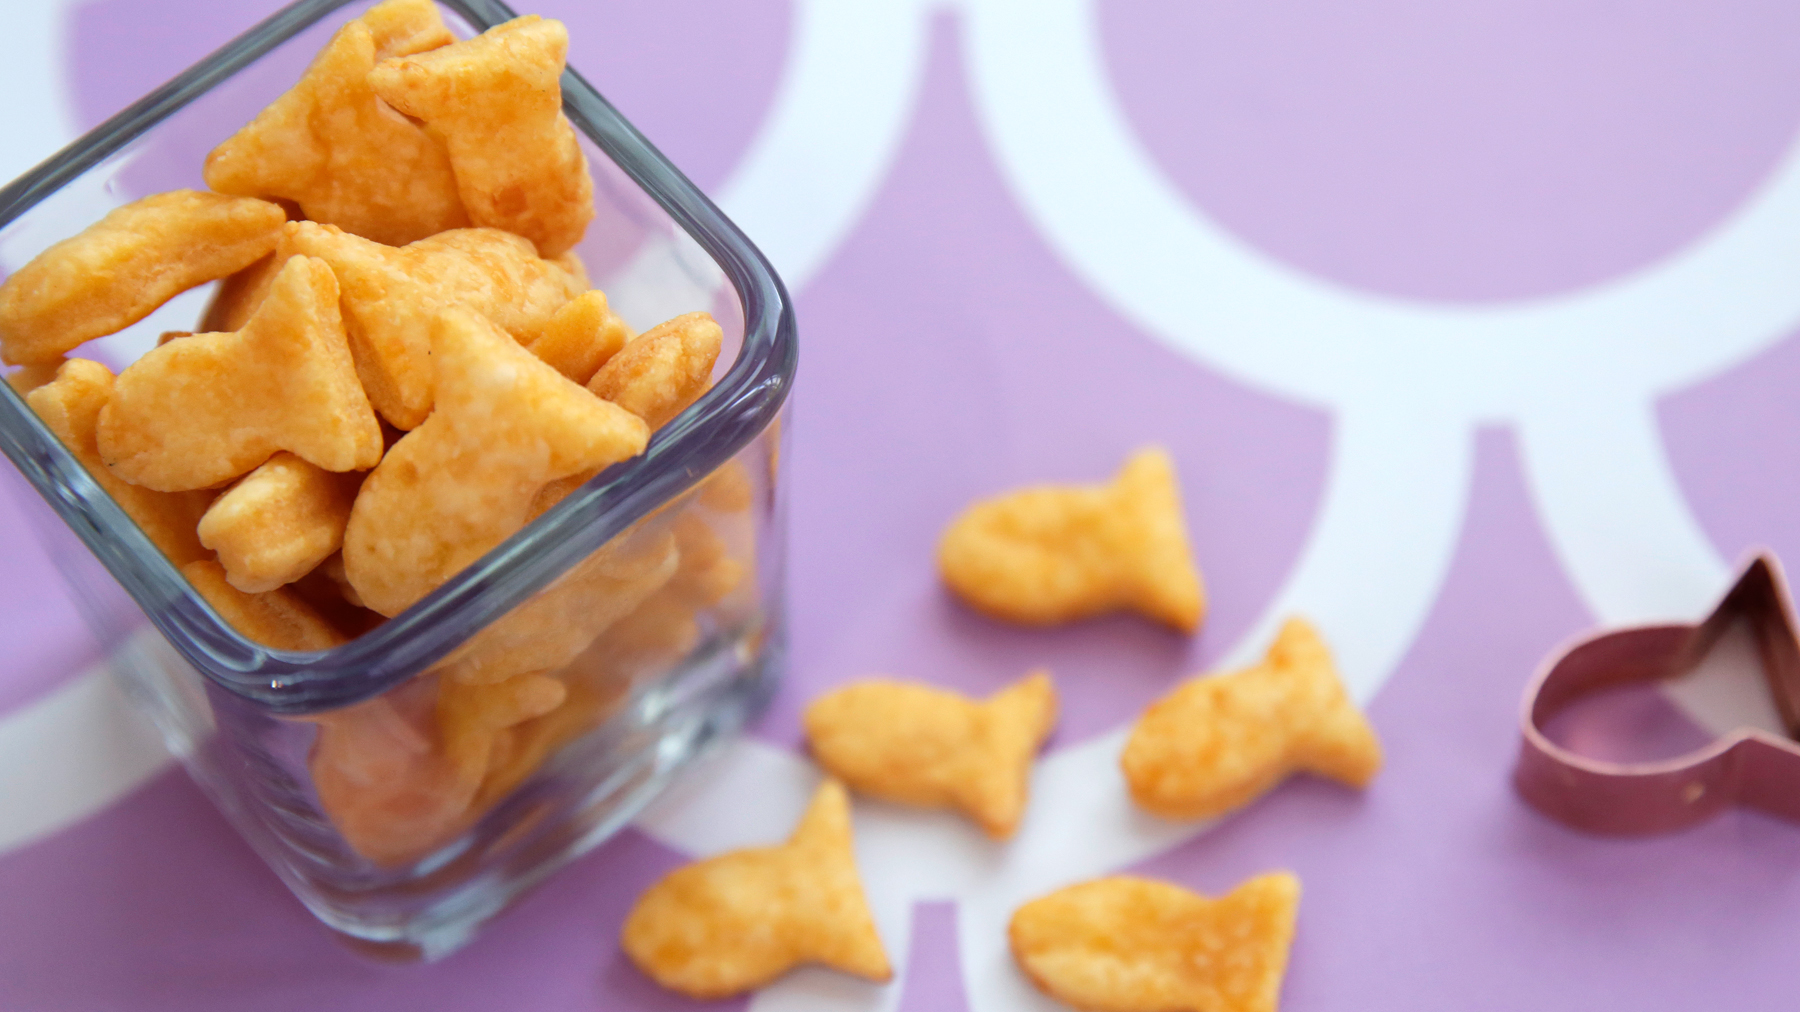 Dive Into a Bowl of Homemade Goldfish Crackers